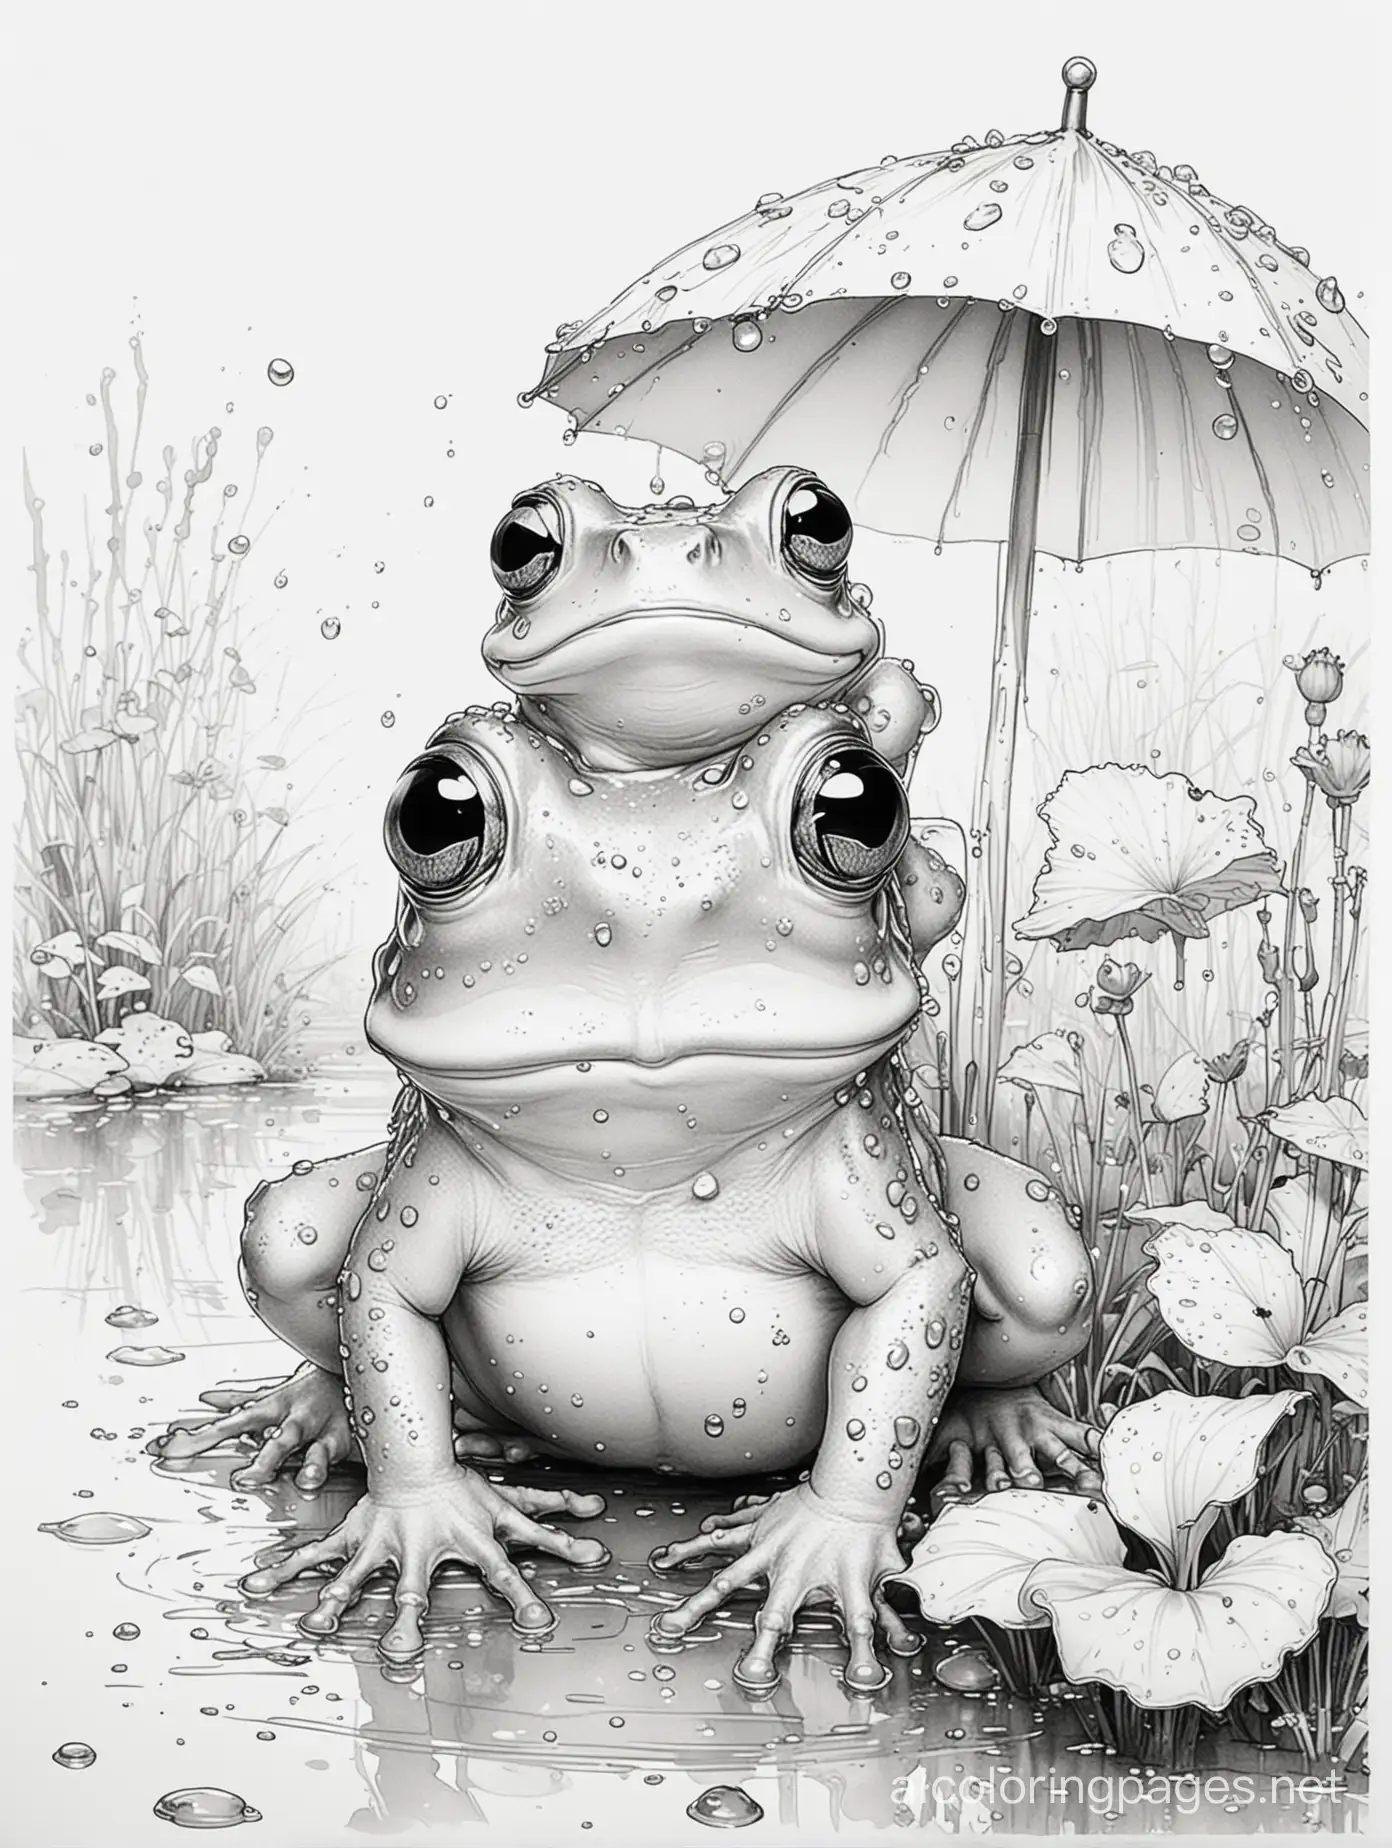 Wet grunge, black ink , cute chibi frogs,  brush mark on white watercolor paper ,sketch illustration, described in the polka dot style of Alphonse Mucha and Jeremy Mann, Coloring Page, black and white, line art, white background, Simplicity, Ample White Space. The background of the coloring page is plain white to make it easy for young children to color within the lines. The outlines of all the subjects are easy to distinguish, making it simple for kids to color without too much difficulty